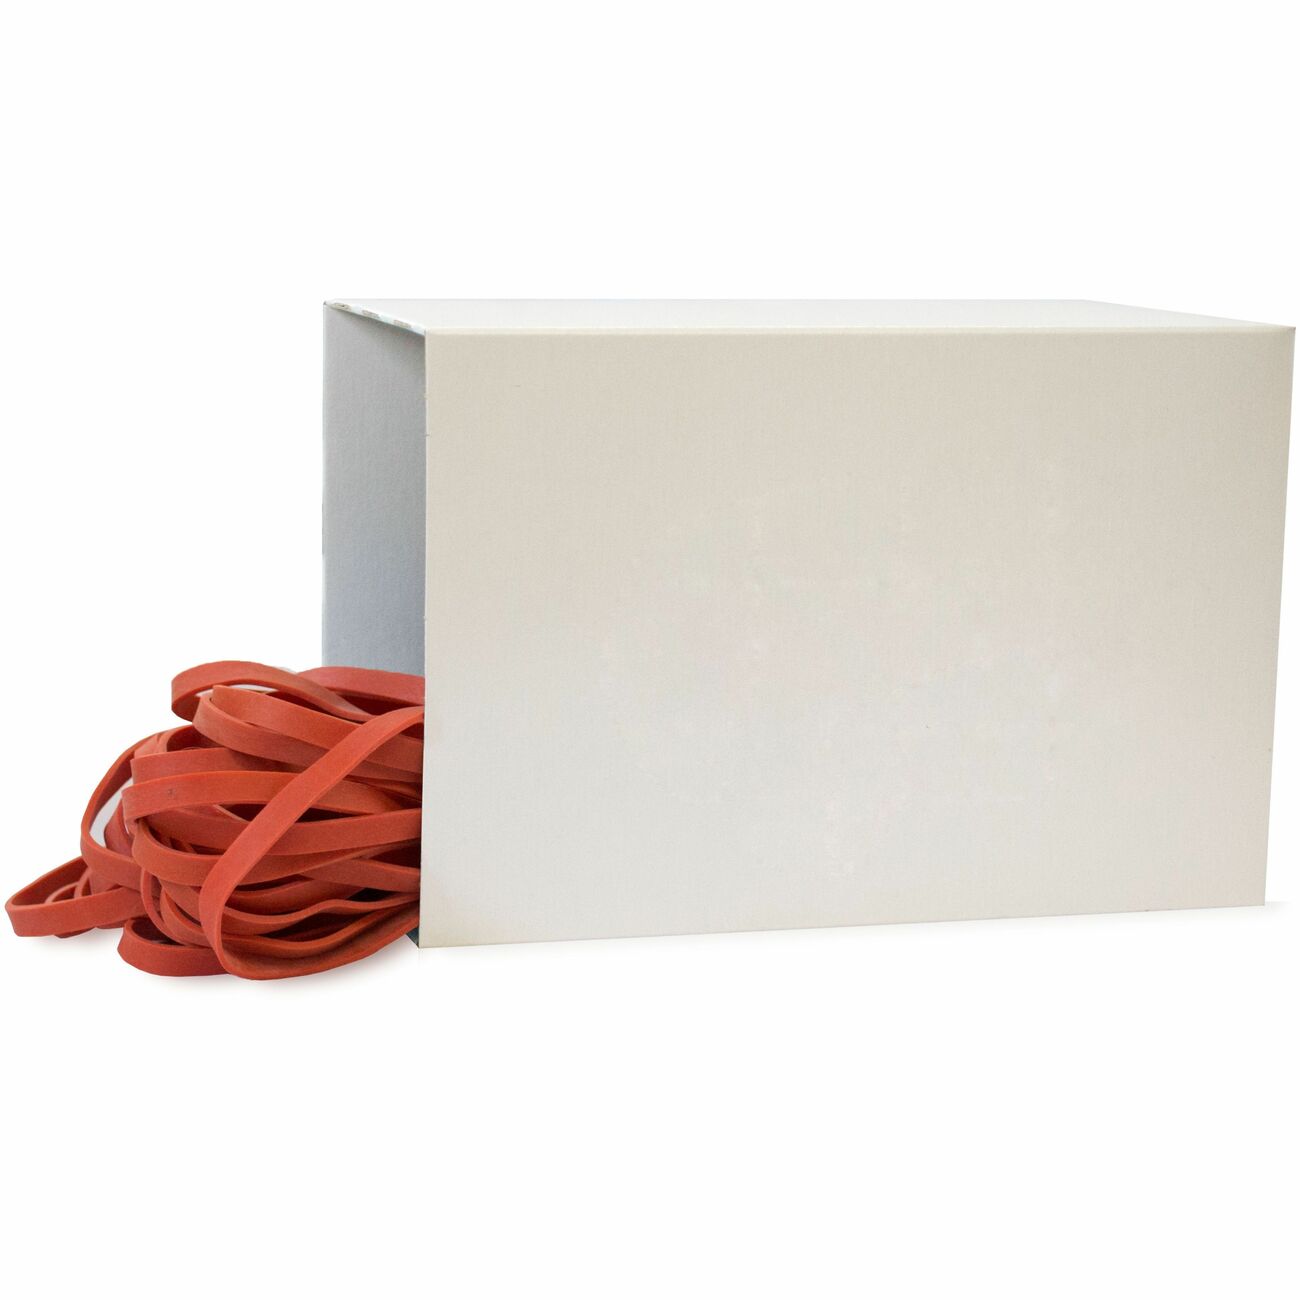 Alliance 00699 7 x 1/8 Red #117B Rubber Bands, 12 lb. - 48/Box